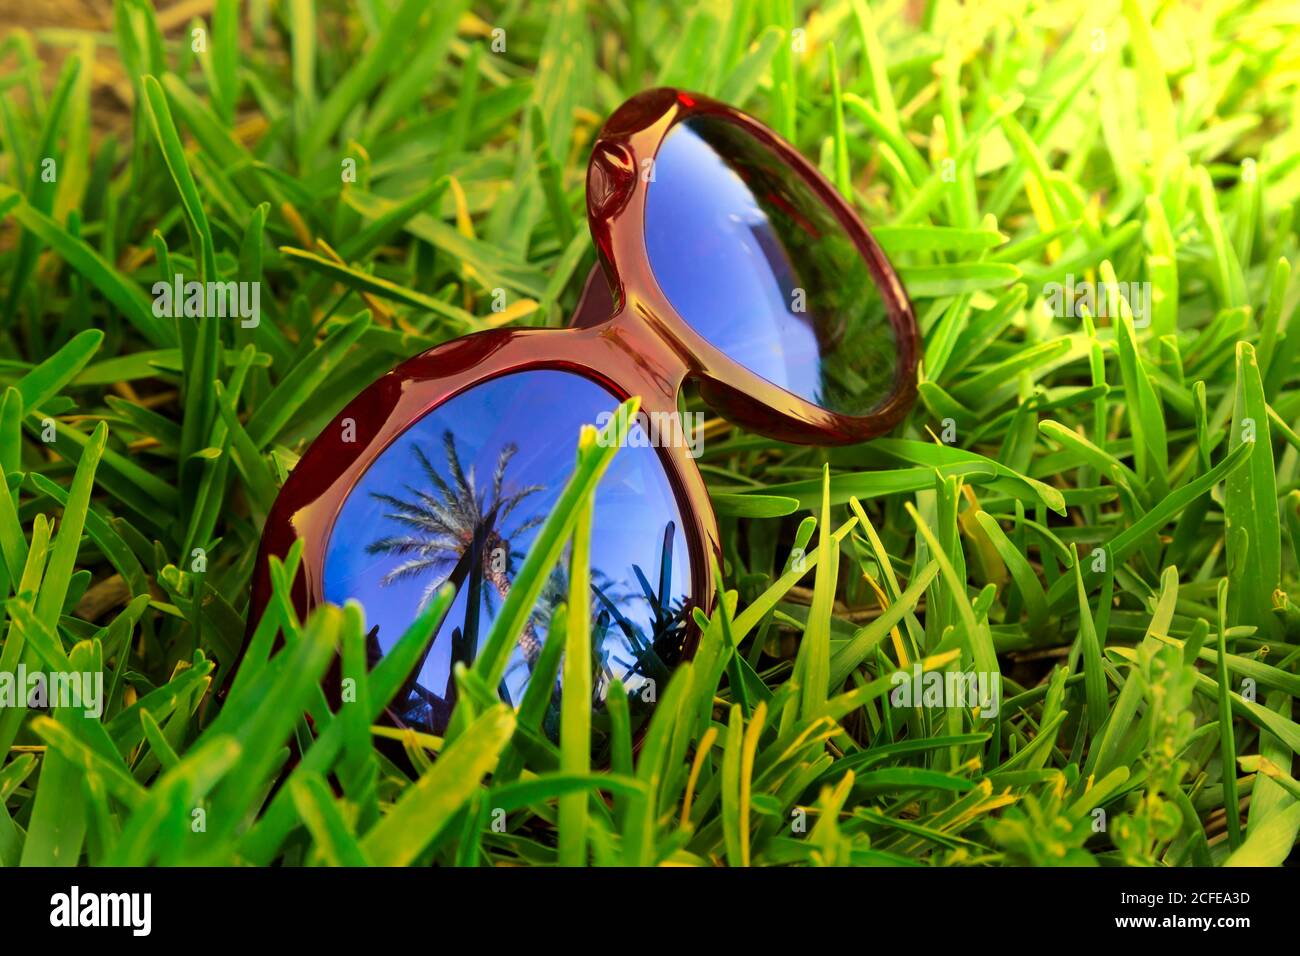 Close up of sunglasses with palm tree and in blue sky reflection. Stock Photo